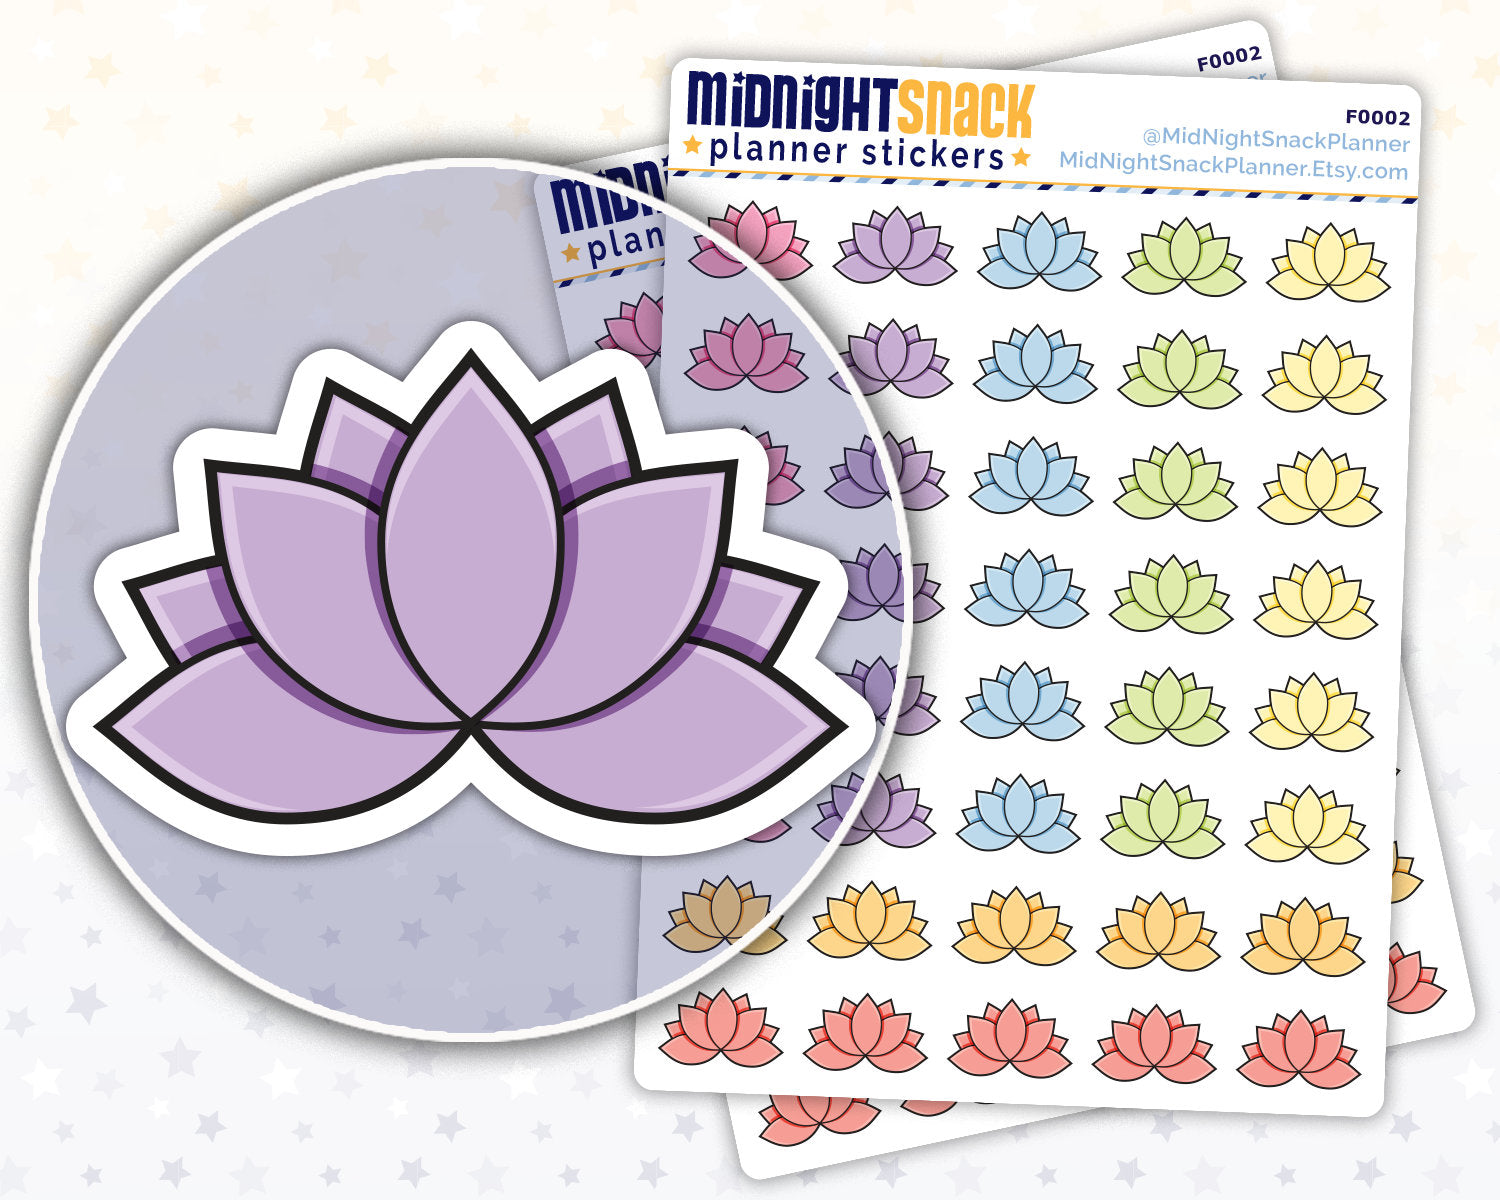 Lotus Flower Yoga Planner Stickers from Midnight Snack Planner